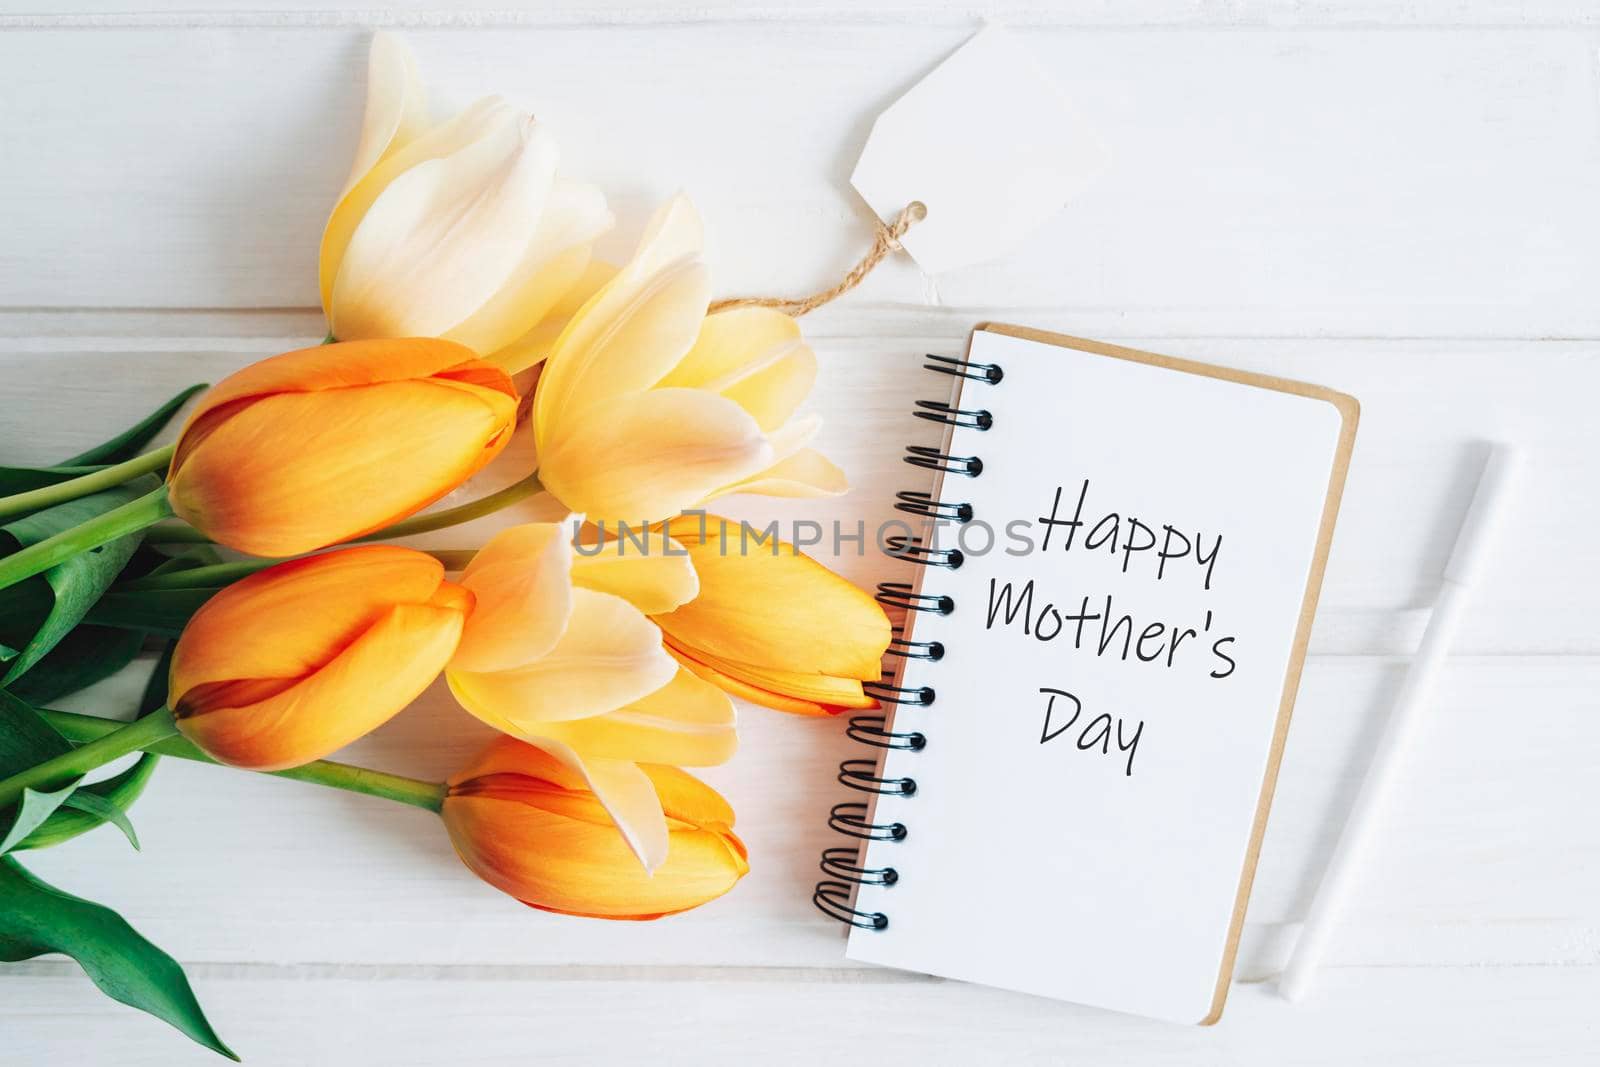 The notebook says Happy Mother's Day. A notebook, a pen and a bouquet of tulips lie on a wooden table. A greeting card.